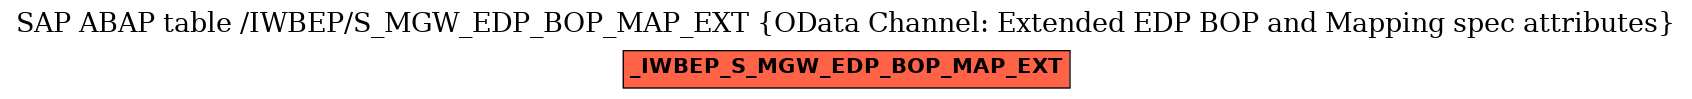 E-R Diagram for table /IWBEP/S_MGW_EDP_BOP_MAP_EXT (OData Channel: Extended EDP BOP and Mapping spec attributes)